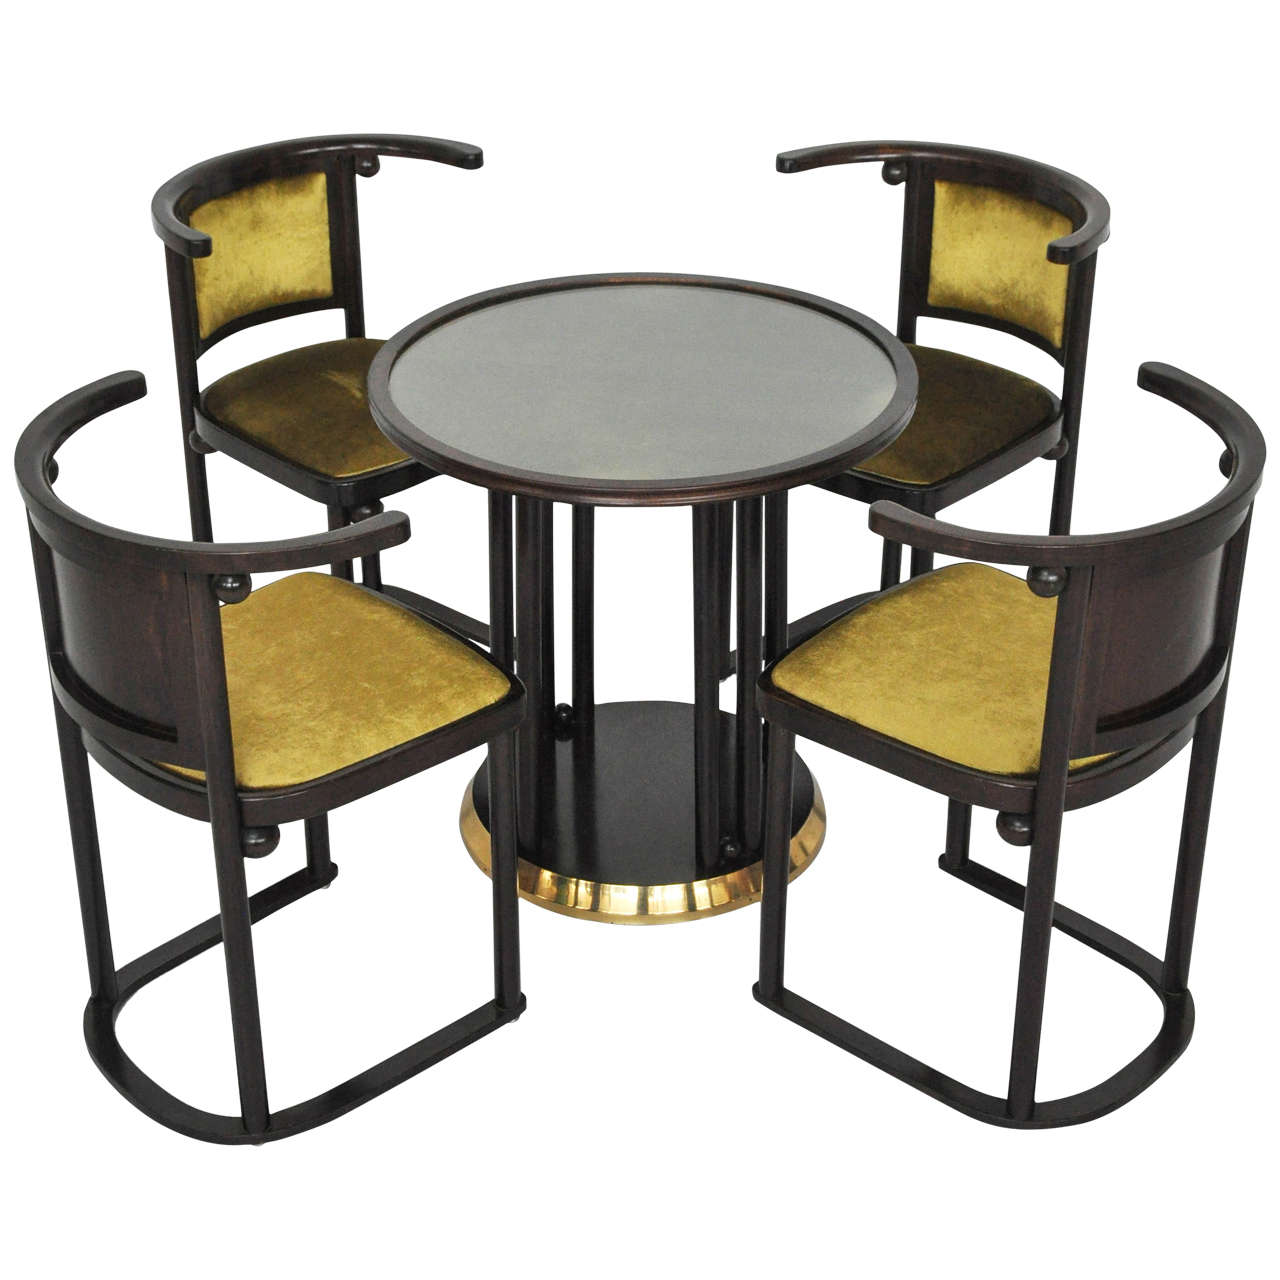 Josef Hoffmann "Fledermaus" Table and Chairs